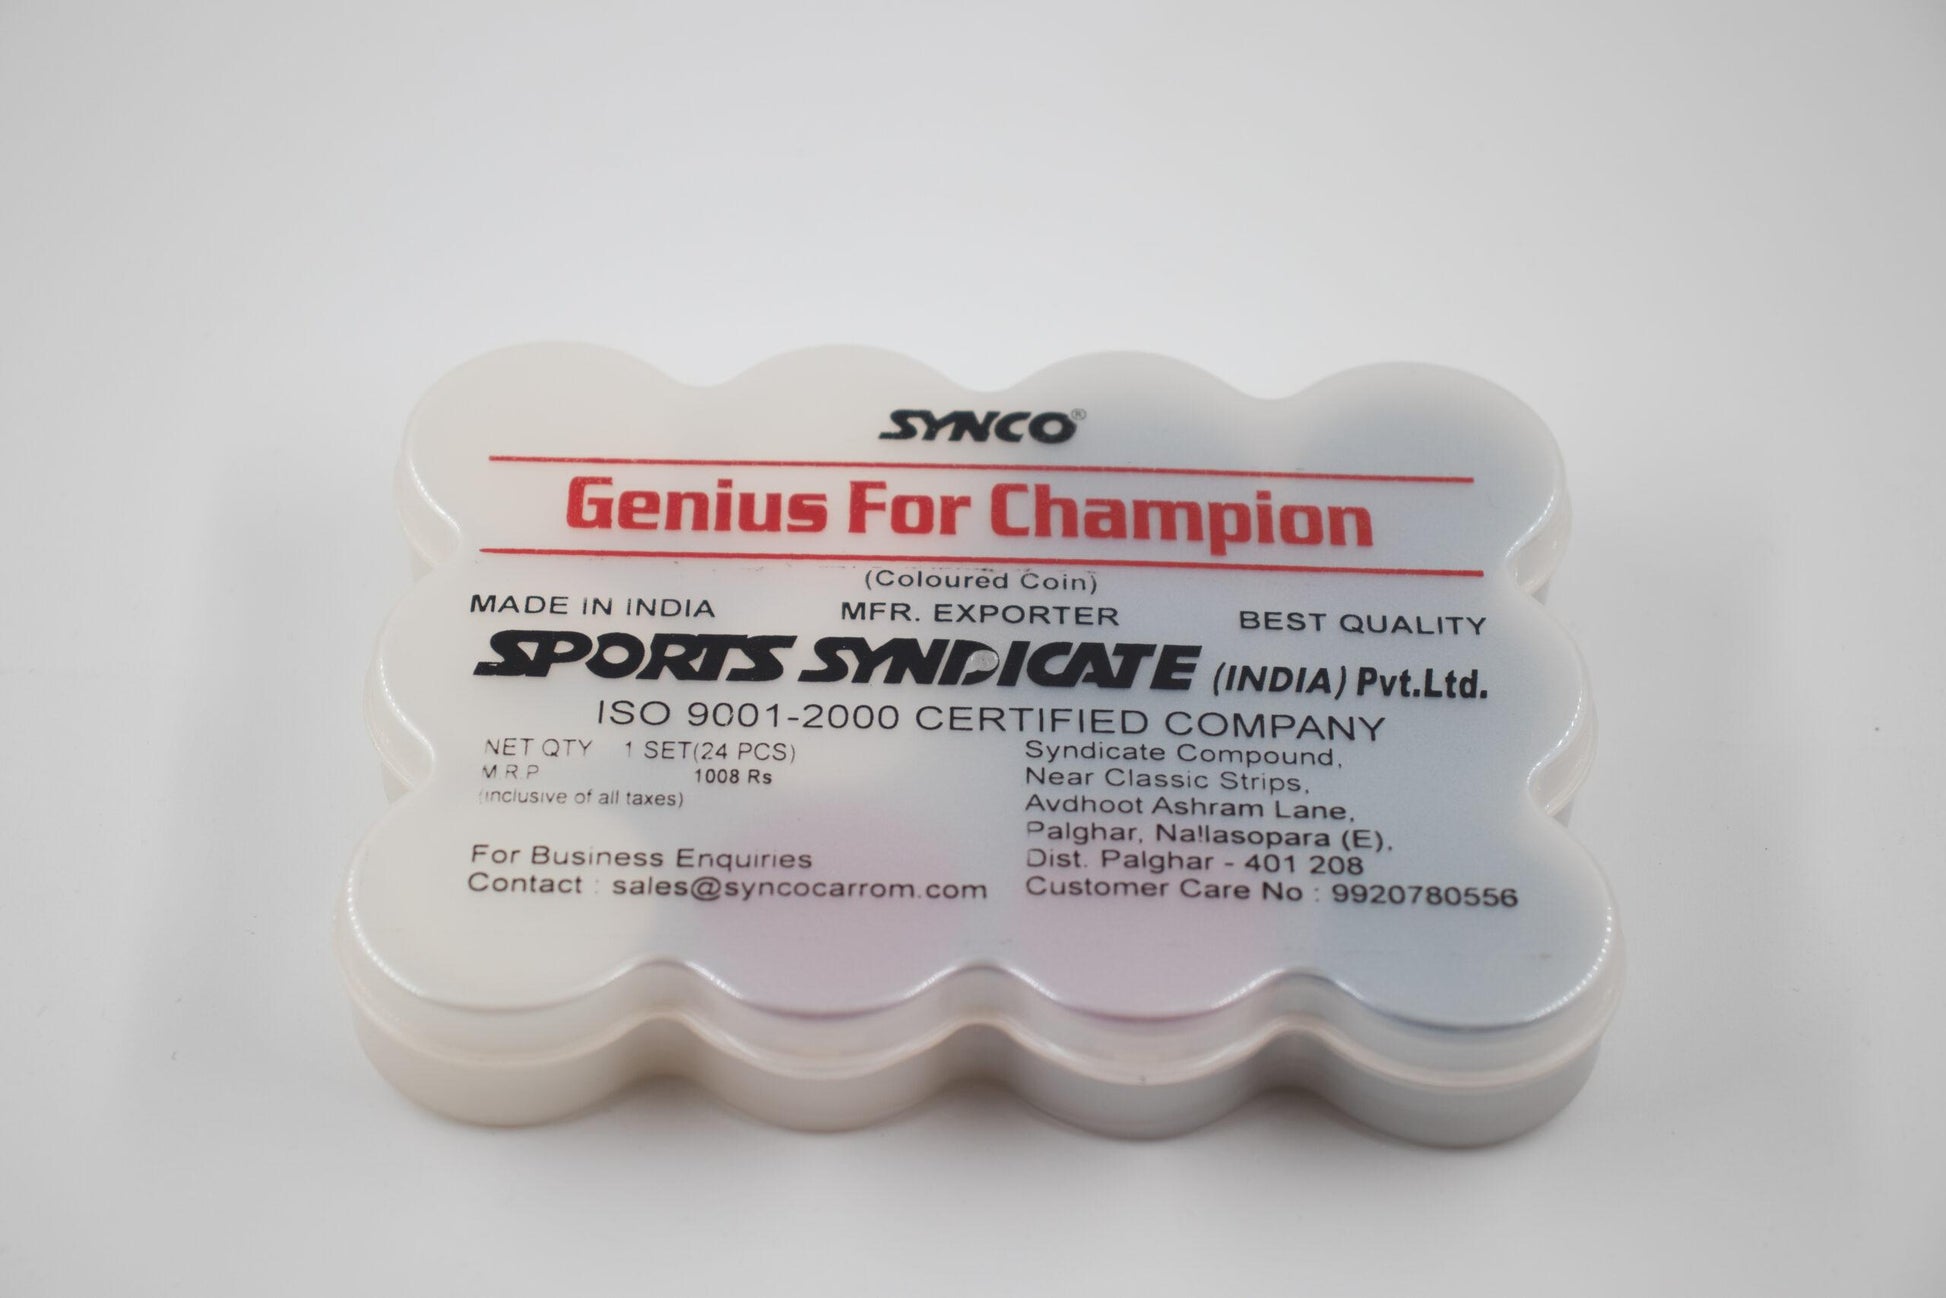 Synco Genius for Champion Colored Carrom Coins - 2